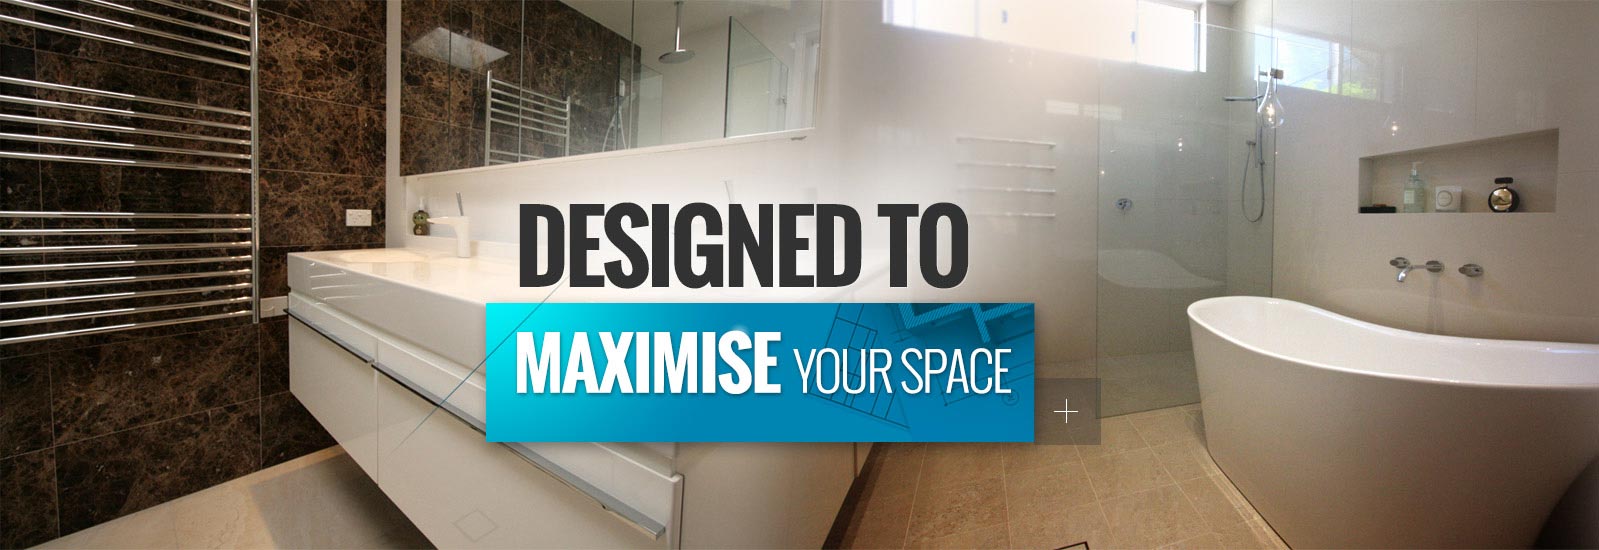 Designed to maximise your space